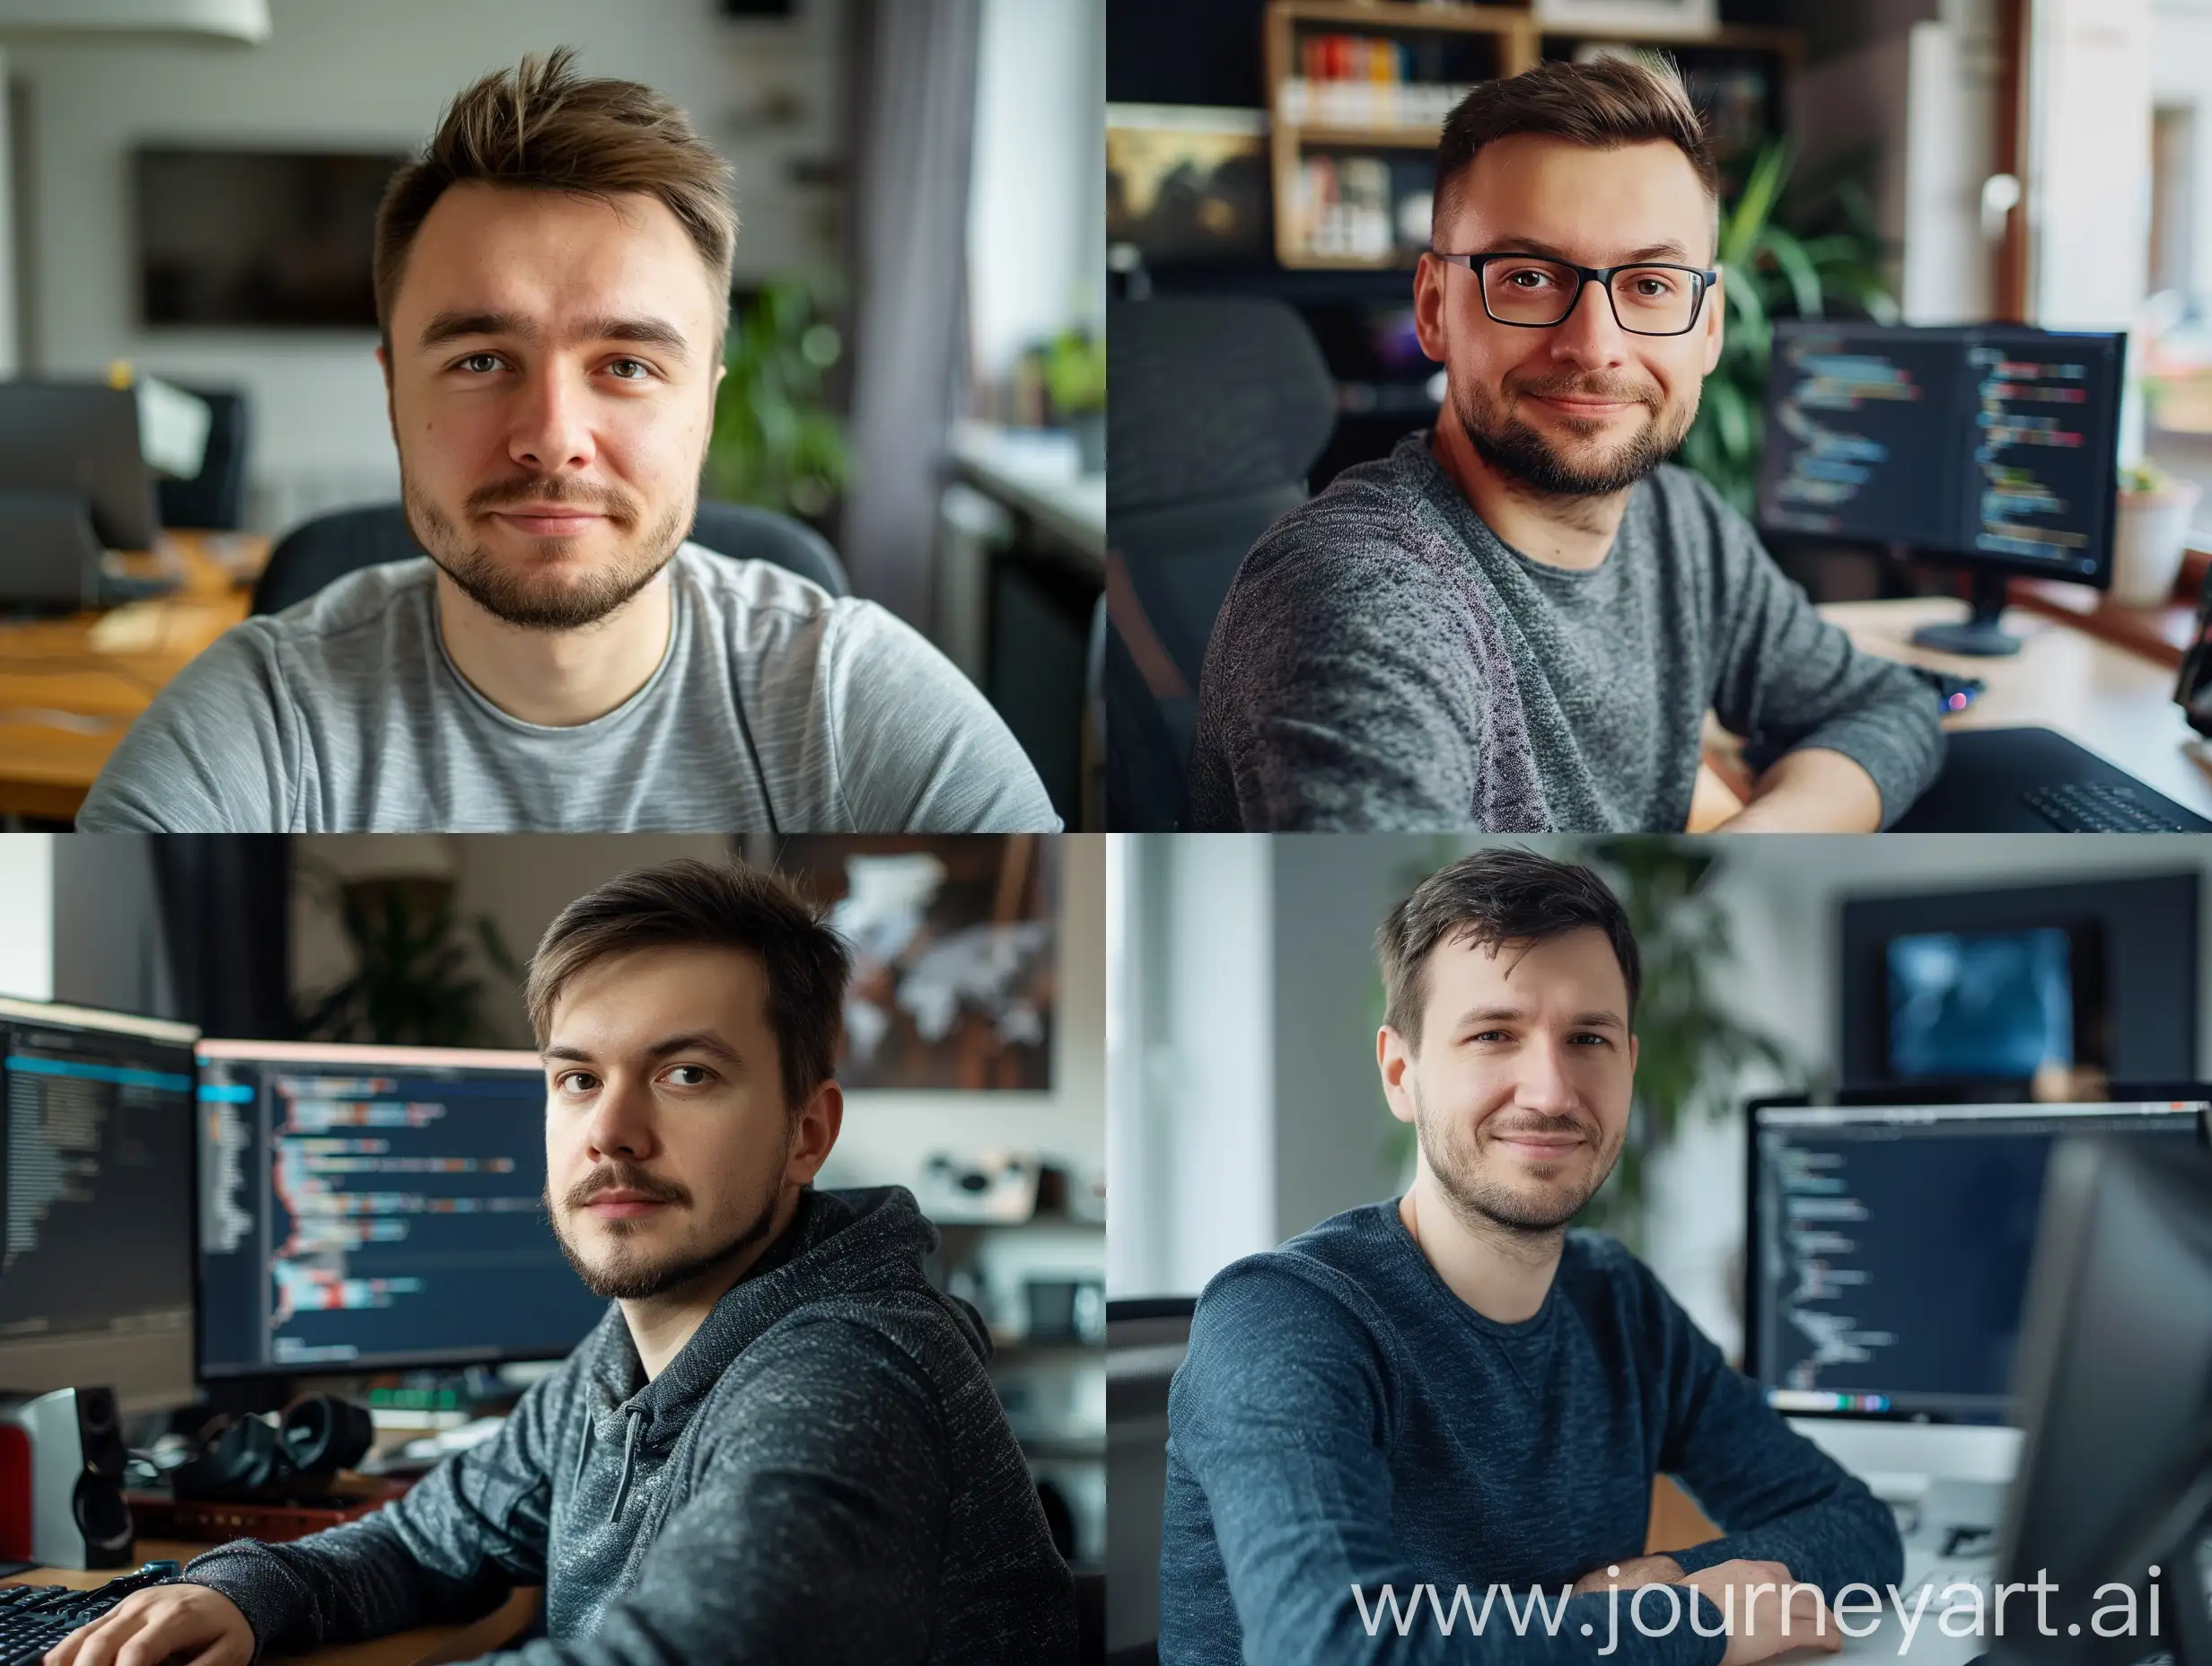 please create a polish males image for the age of 30 years full stack developer